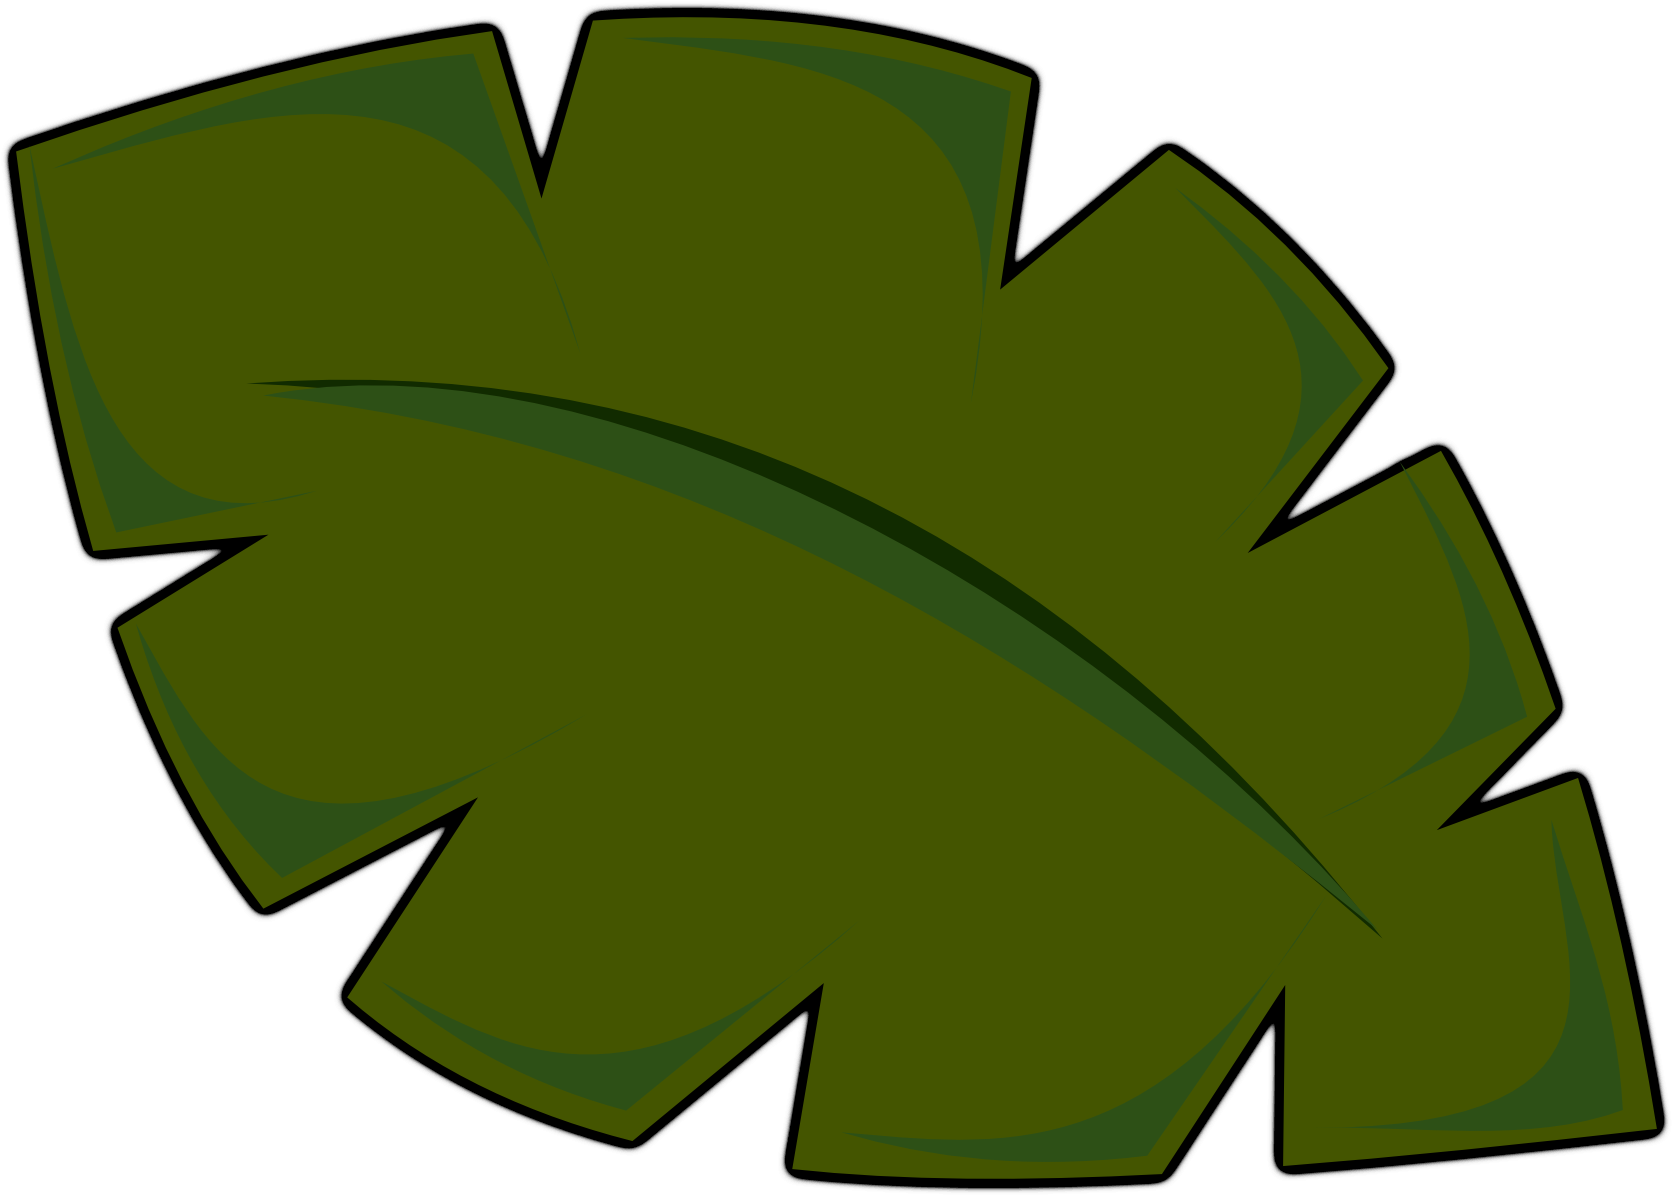 A Green Leaf With A Black Background